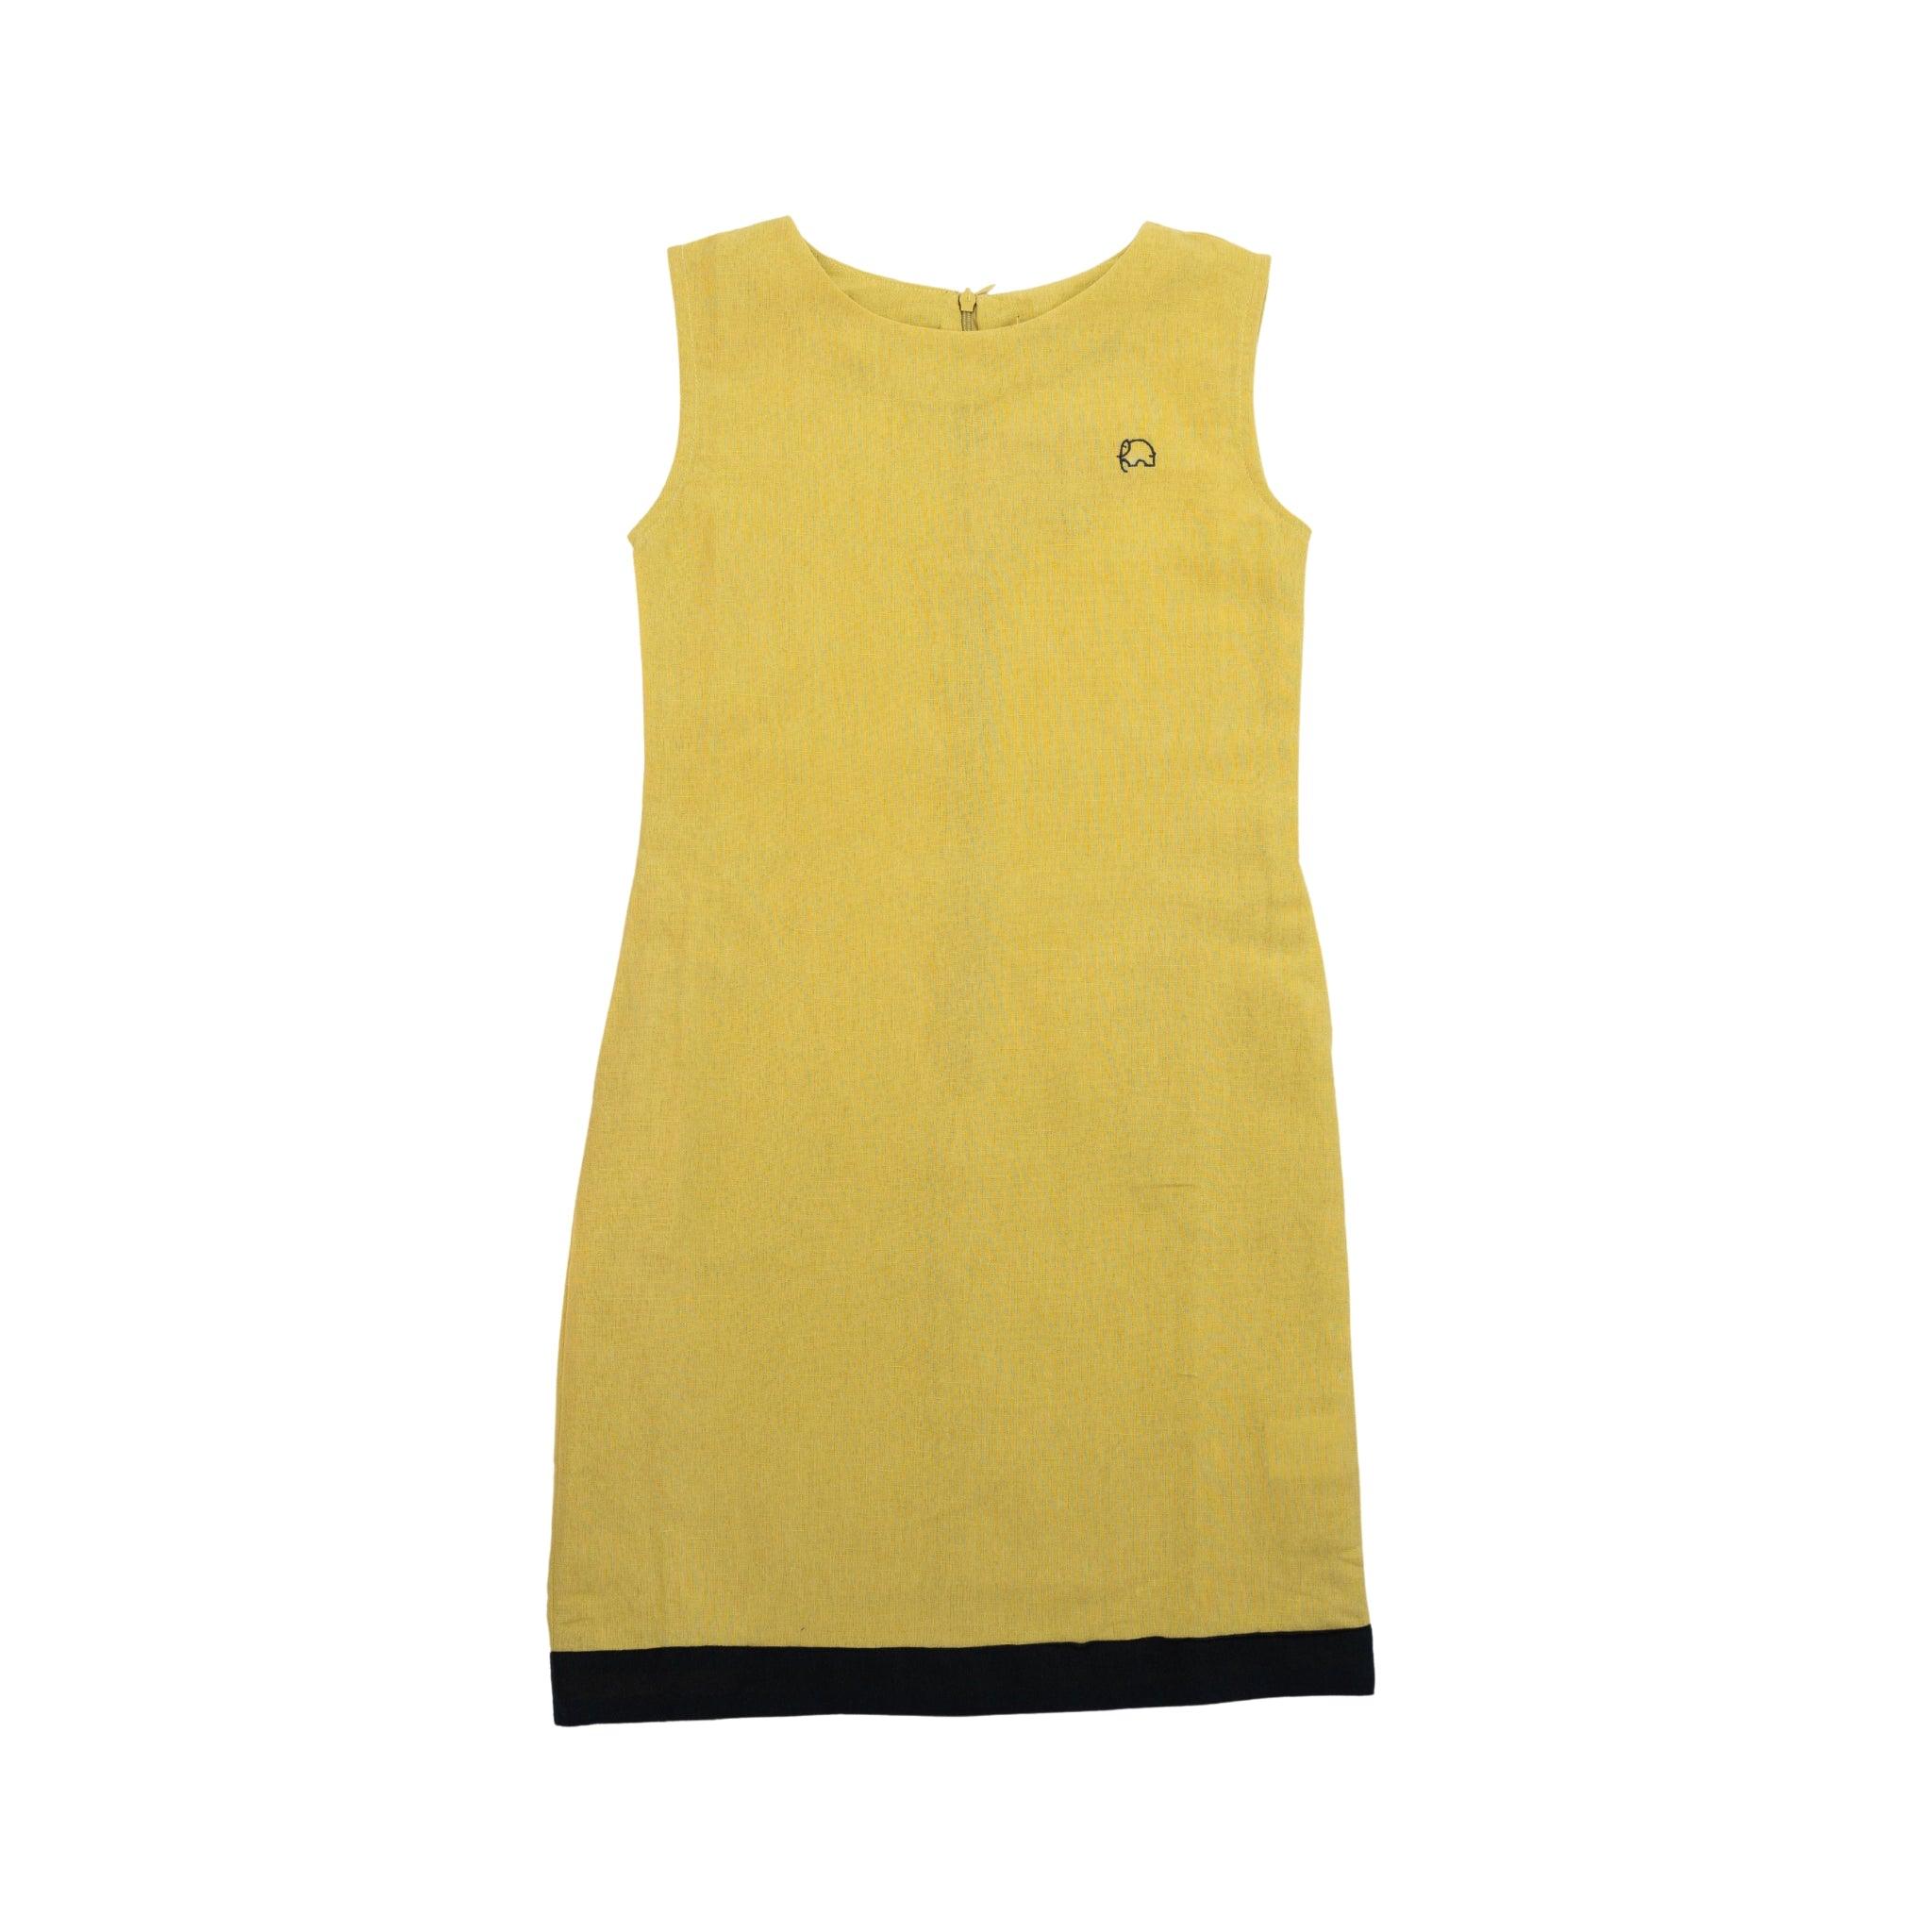 Yellow sleeveless Linen Cotton Round Neck Frock for Kids in Cream Gold by Karee, displayed against a white background.